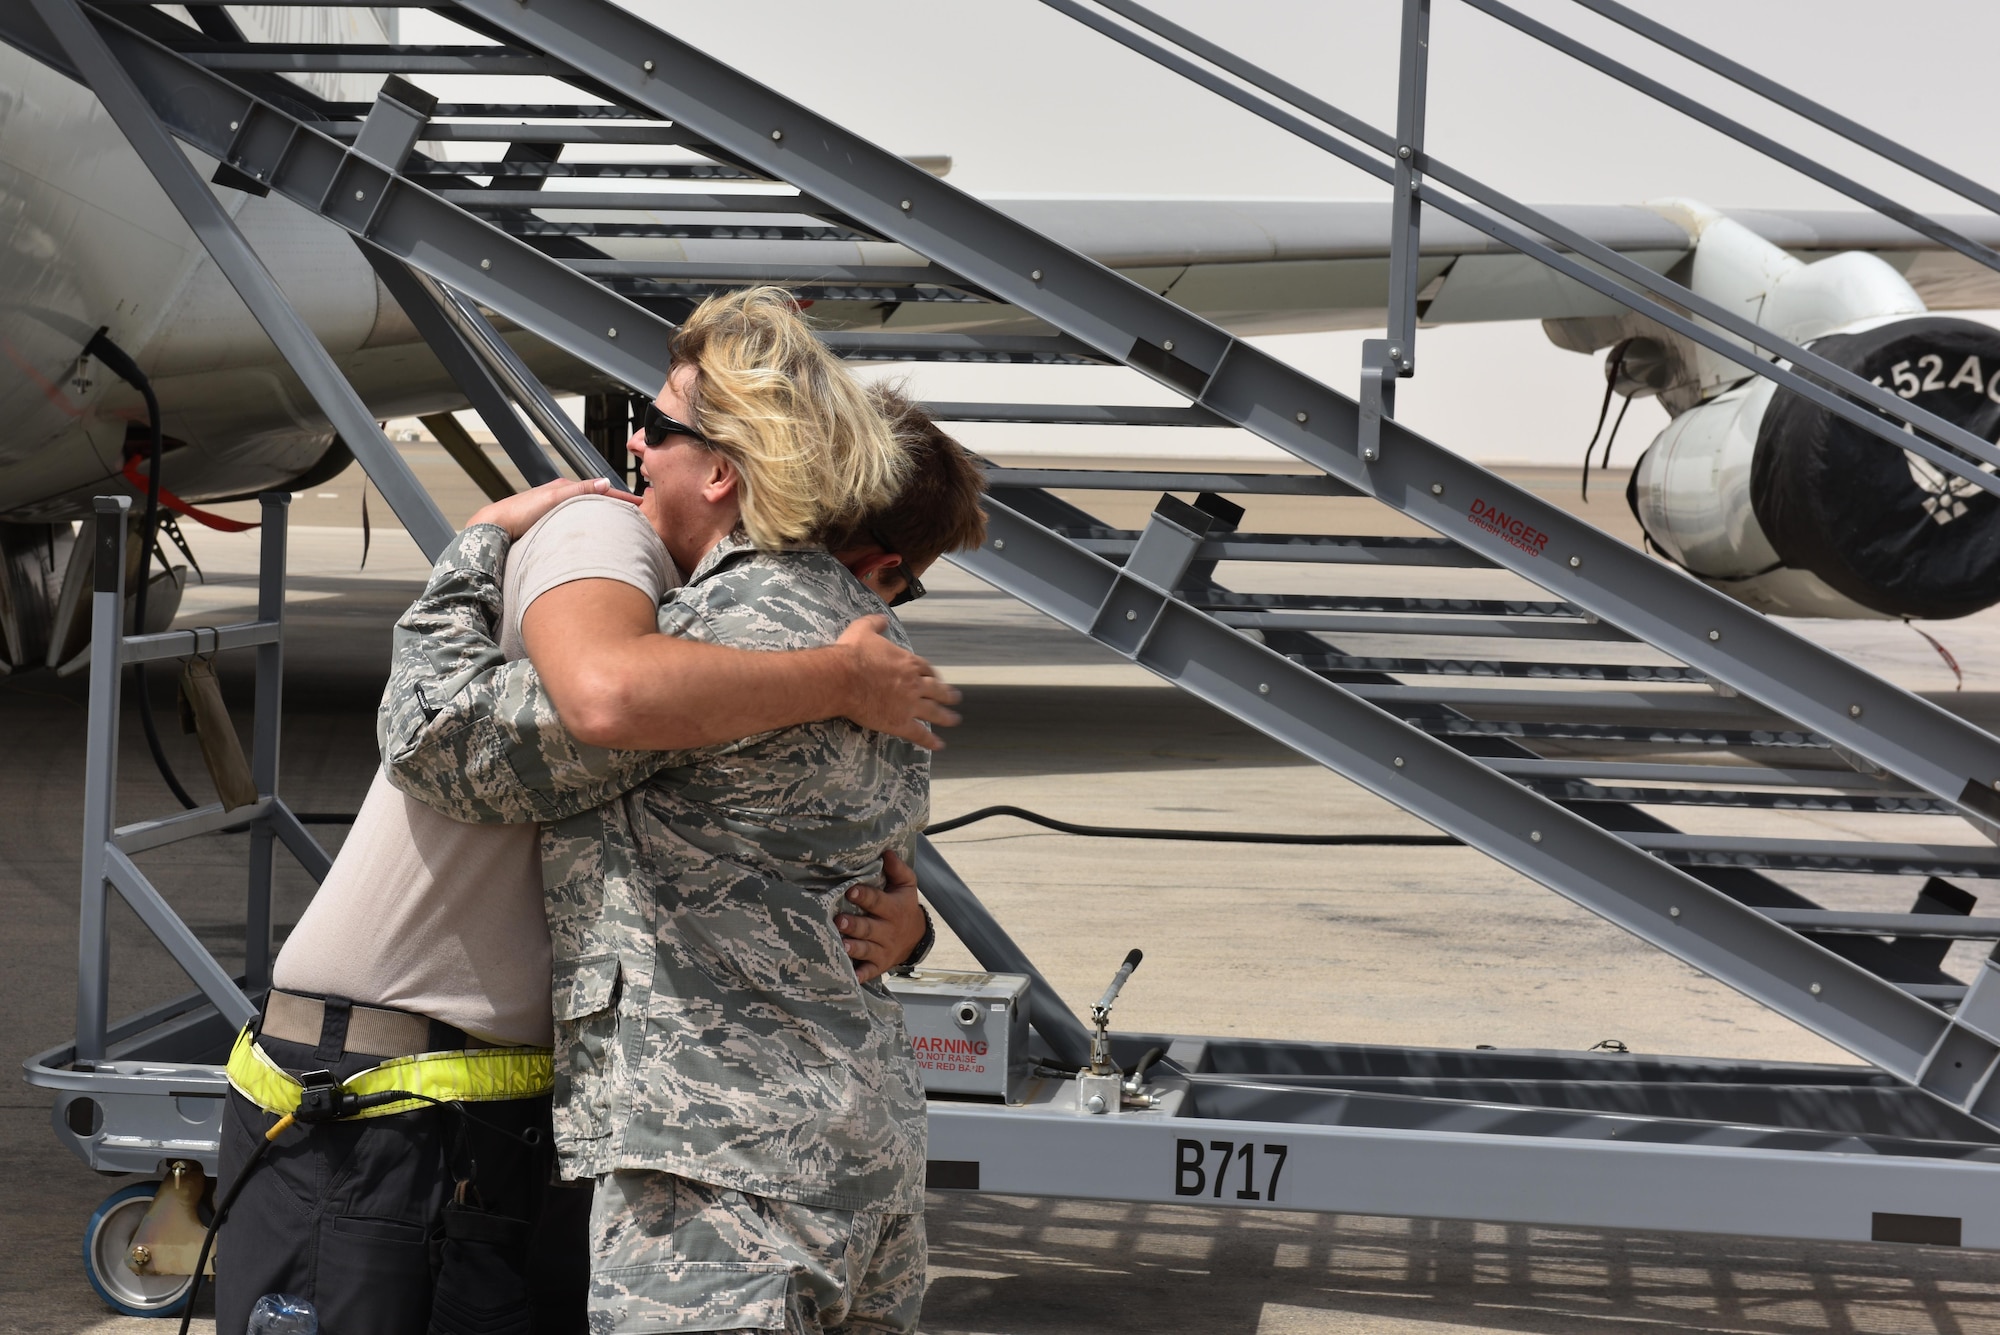 Maj. Donna, U.S. Air Forces Central Command sexual assault response coordinator, and her son Senior Airman Colt embrace at Al Dhafra Air Base, United Arab Emirates, July 20, 2017. Donna and Colt reunited while deployed after spending approximately two years apart. (U.S. Air Force photo by Staff Sgt. Marjorie A. Bowlden)